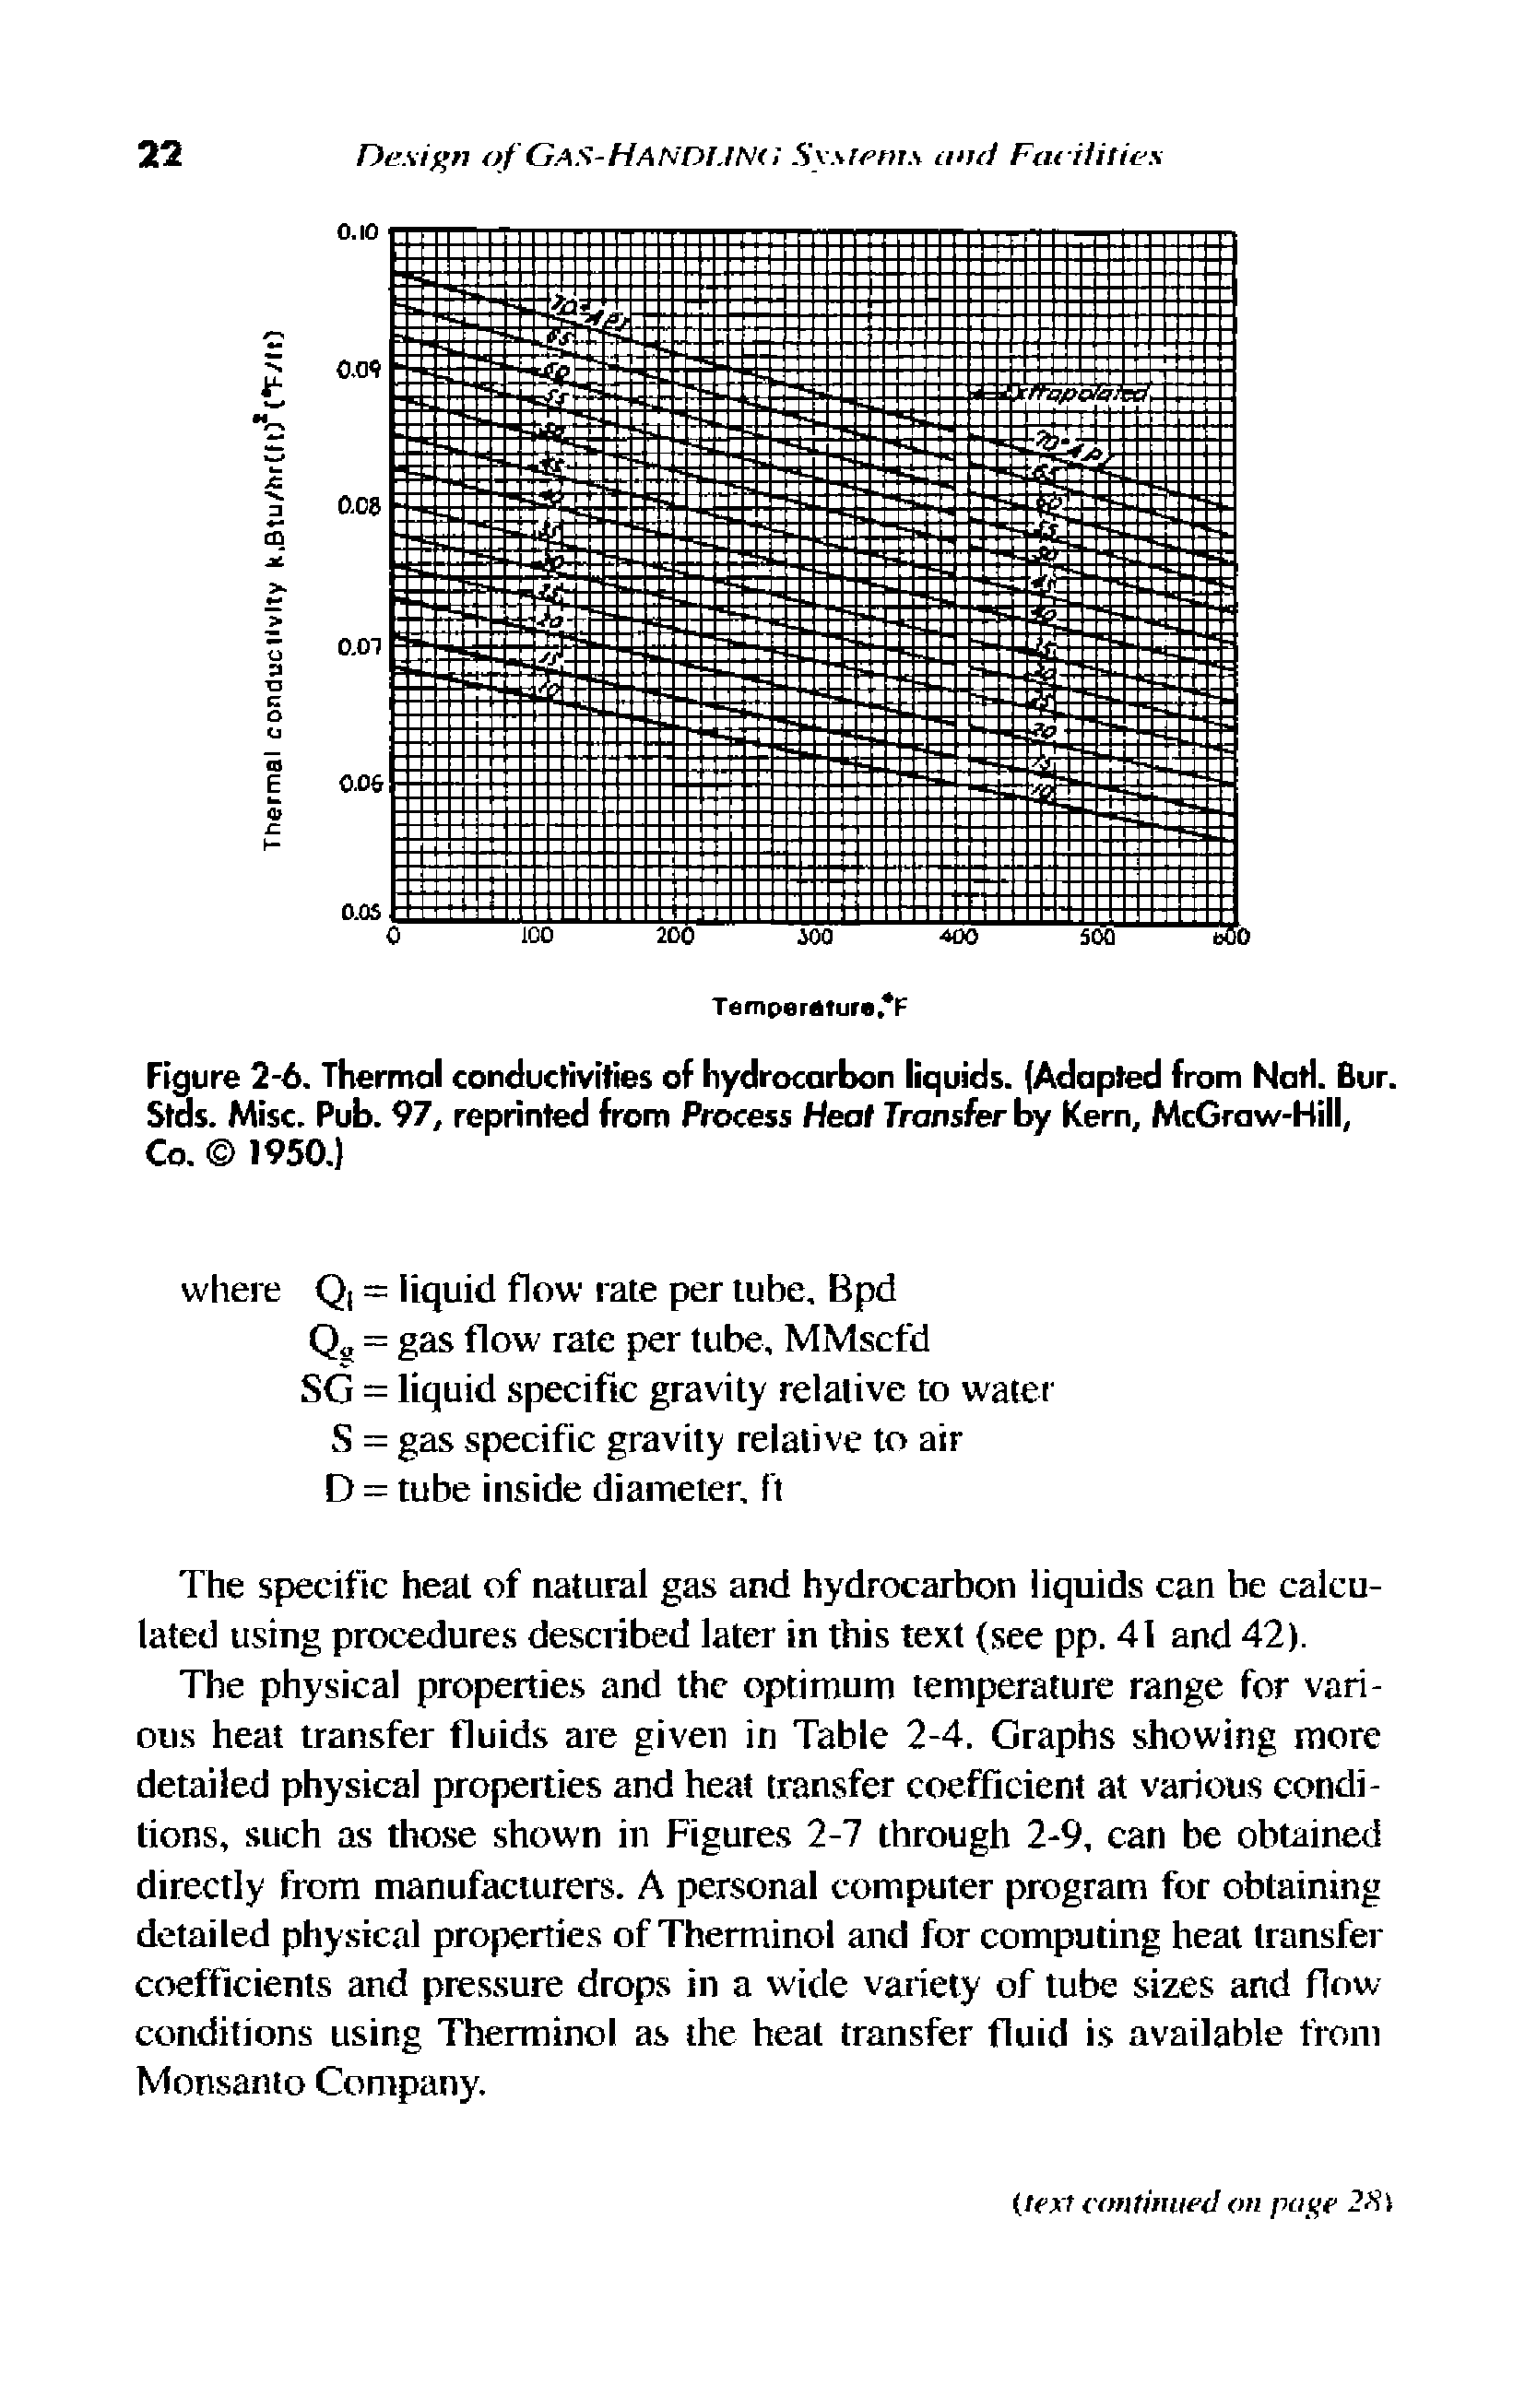 Figure 2-6. Thermal conductivities of hydrocarbon liquids. (Adapted from Natl. Bur. Stas. Misc. Pub. 97, reprinted from Process Heat Transfer by Kern, McGraw-Hill, Co. 1950.)...